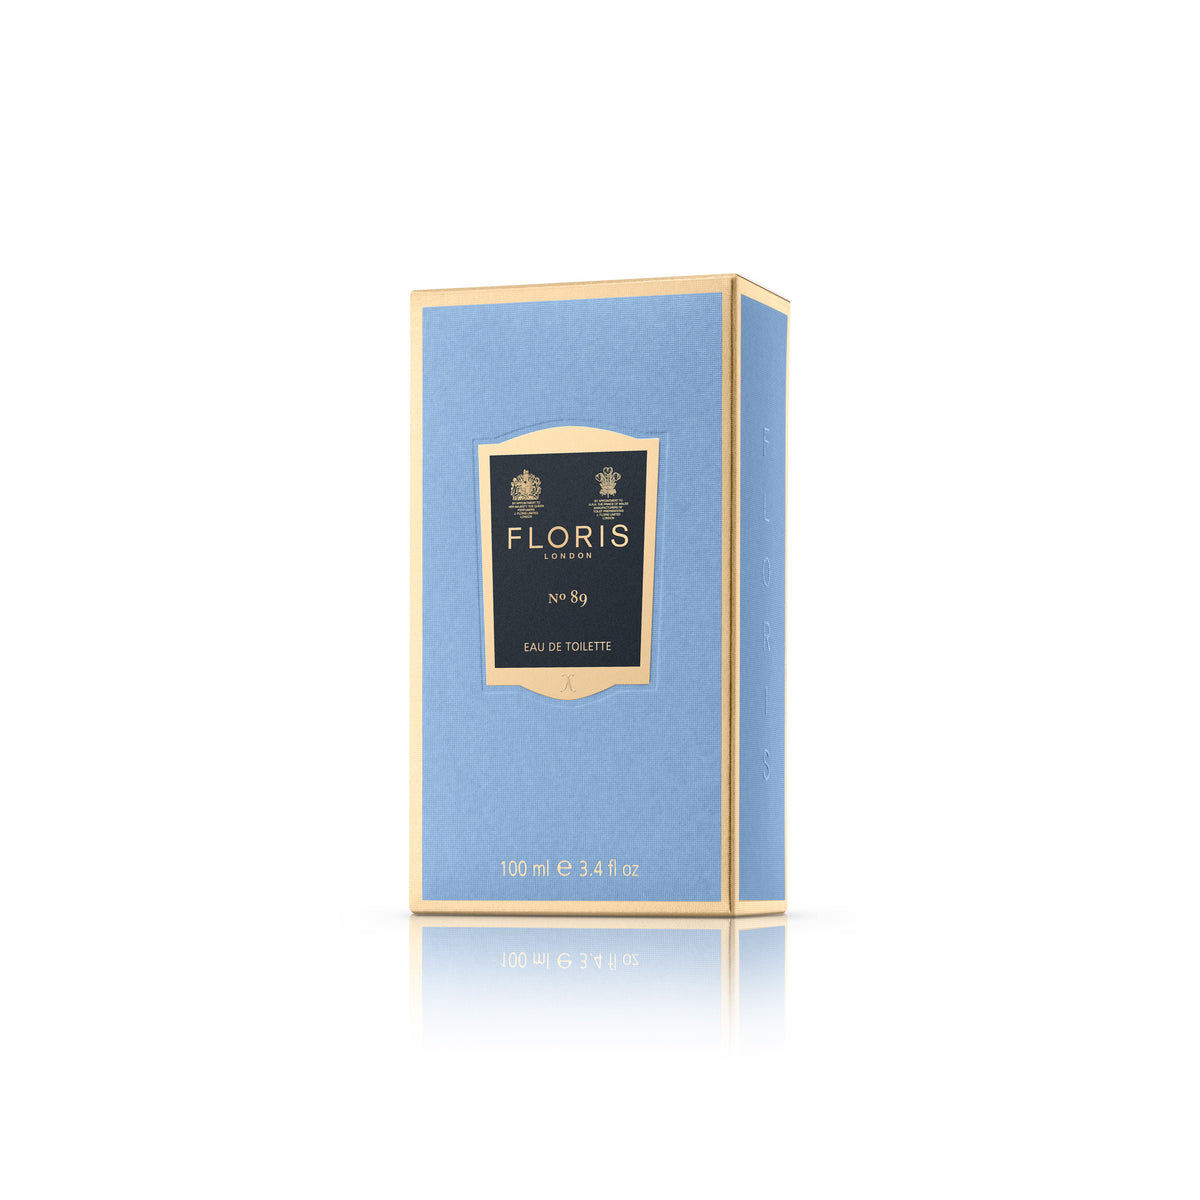 A FLORIS No.89 100 ML fragrance with a citrus woody scent packaged in a blue box from KirbyAllison.com.